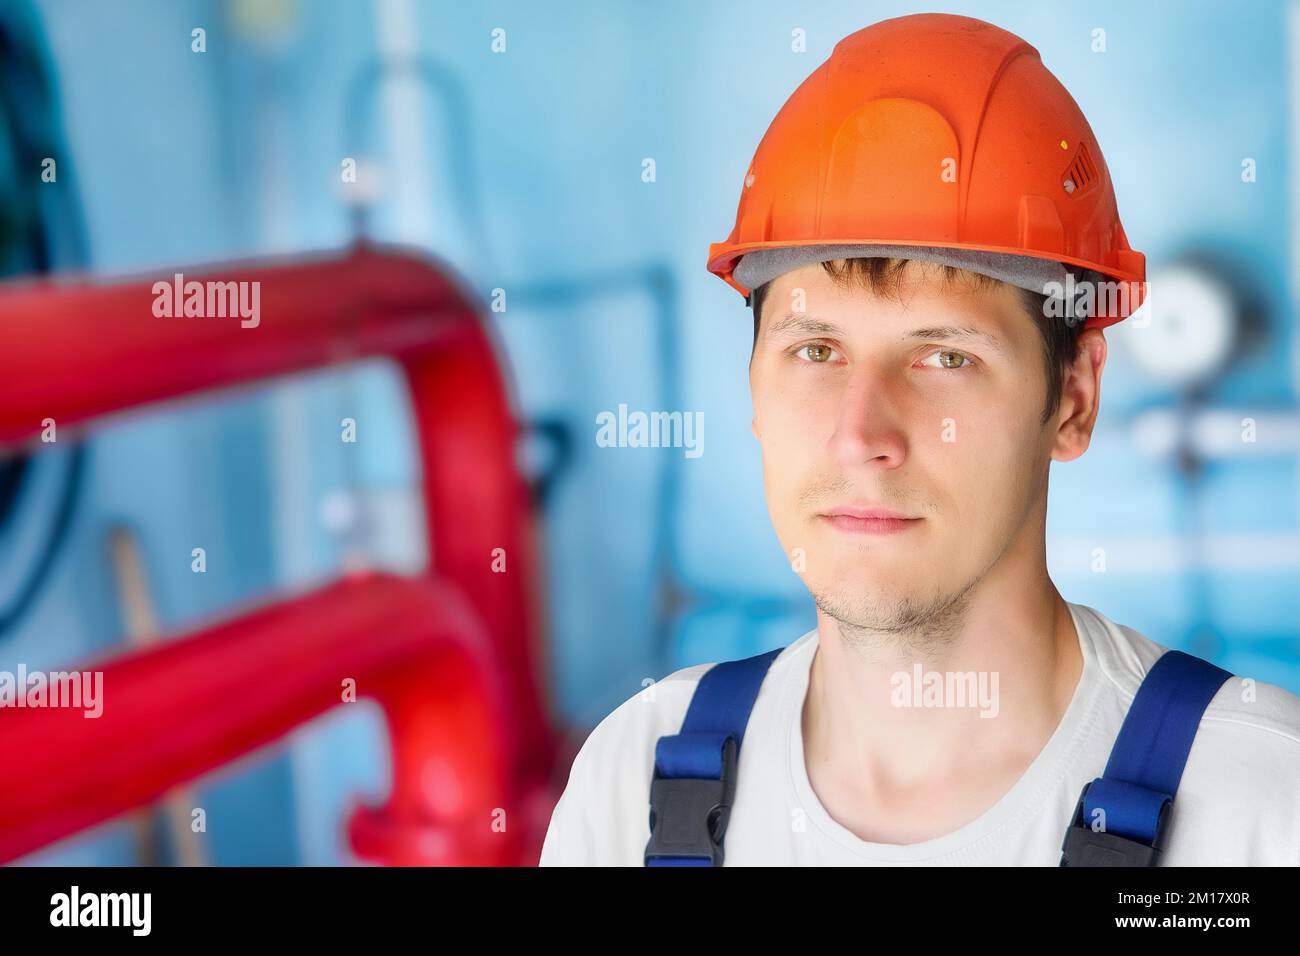 Man in construction helmet looks directly into cell inside room. Authentic portrait of real gas worker.. Stock Photo